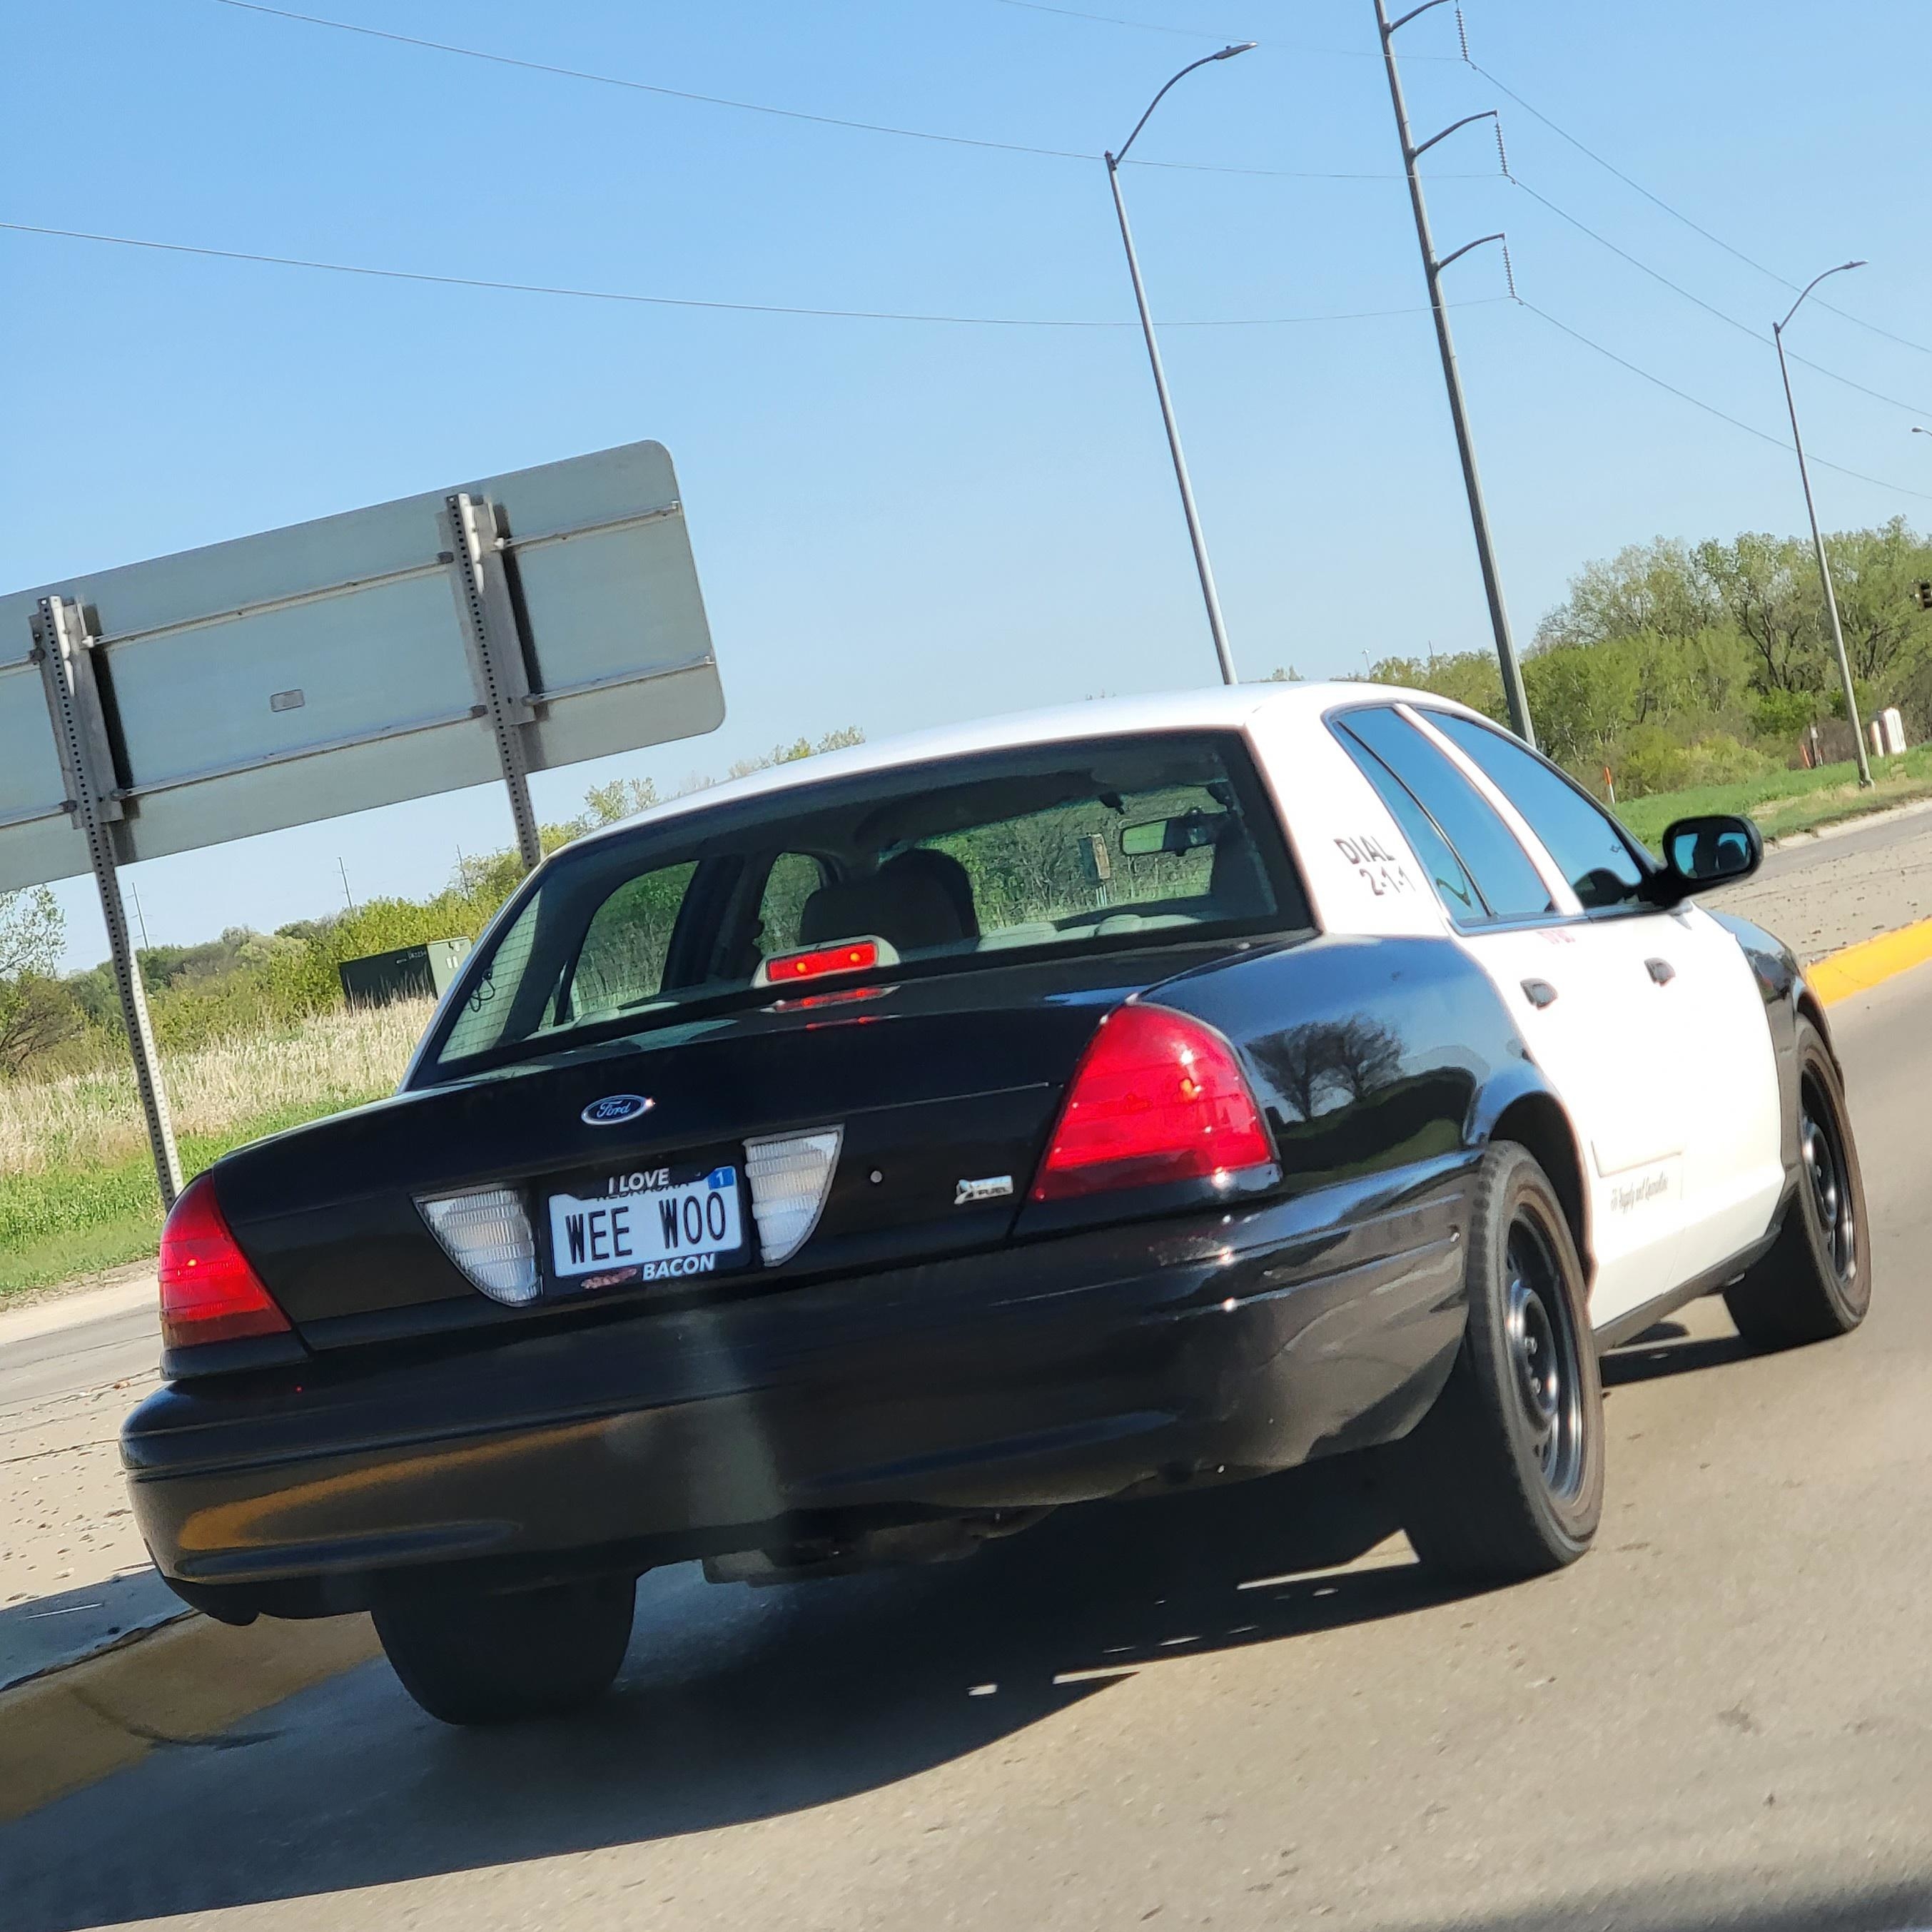 Police car with license plate reading &quot;WEE WOO&quot;